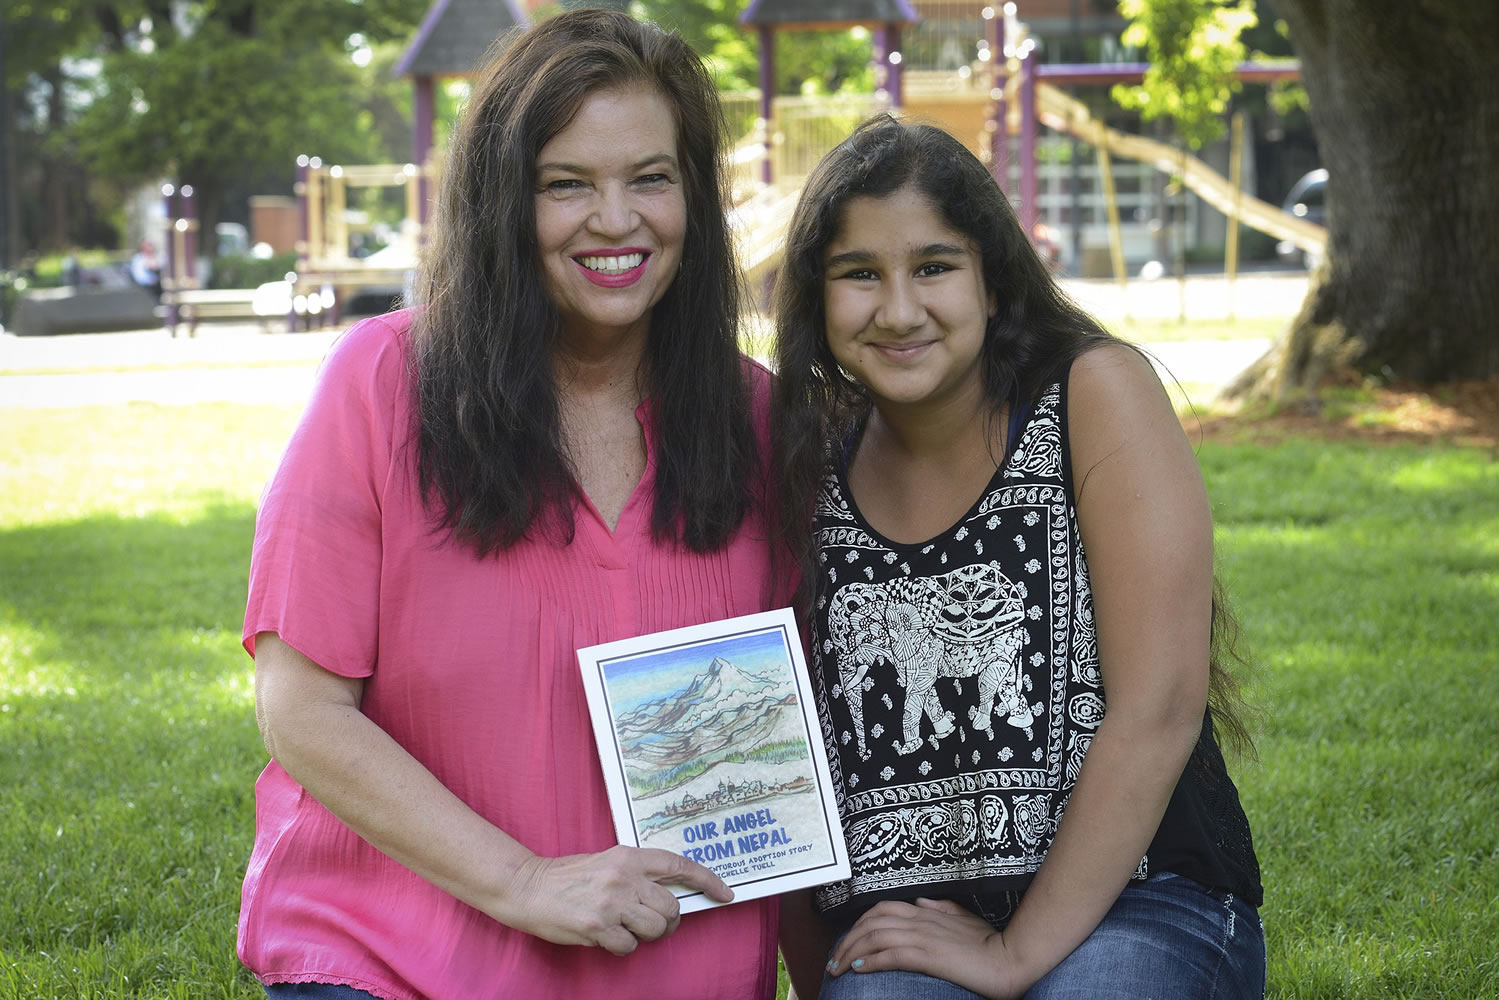 Ariane Kunze/The Columbian
Michelle Tuell, left, recently published a book about adopting her daughter, Maya Tuell, 12, from Nepal. The two are collecting donations for Maya's former orphanage in the wake of the recent earthquakes in Nepal.